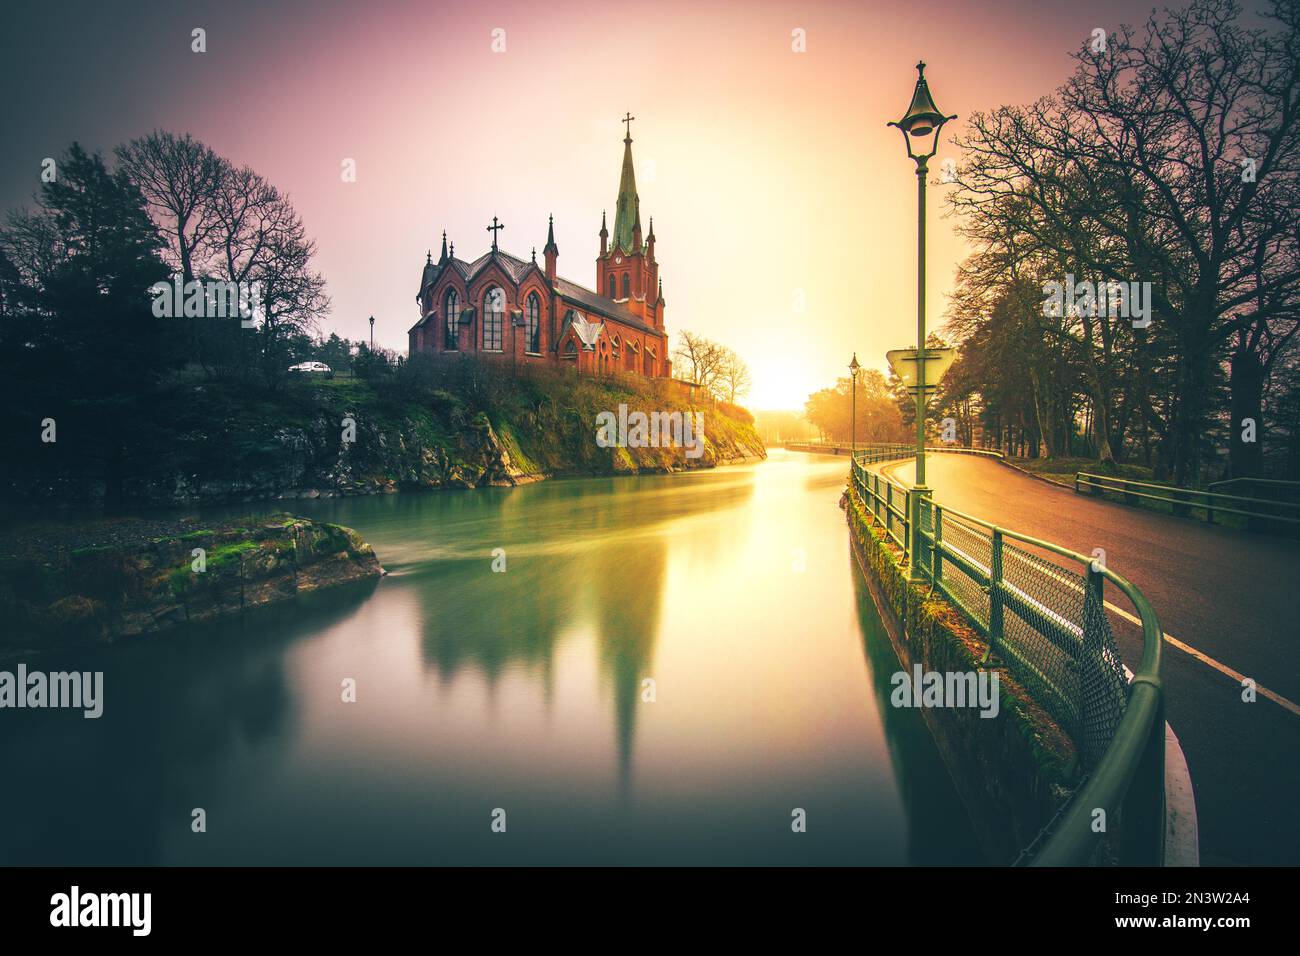 Trollhaettan, neo-Gothic church by the waterworks in the middle of the river, sunset, southern Sweden, Sweden Stock Photo